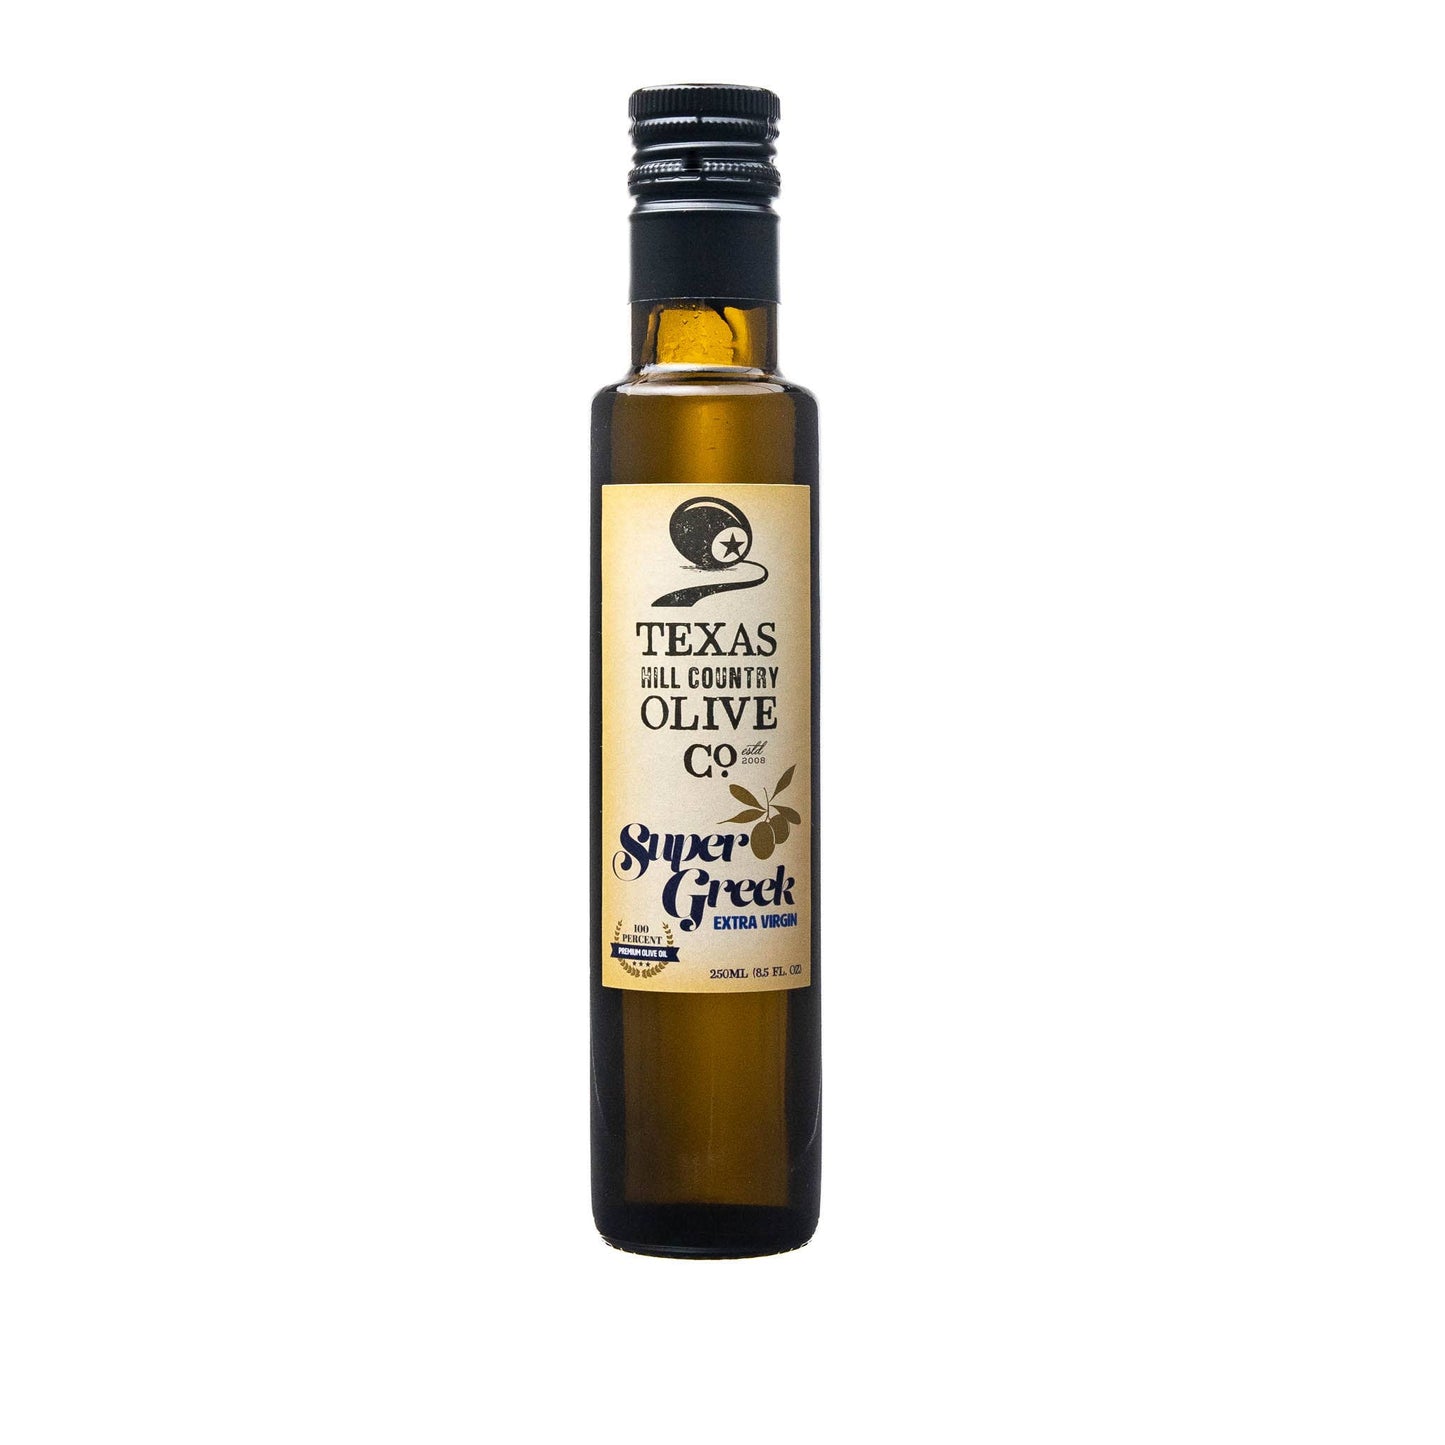 Texas Hill Country Olive Co. - Super Greek Extra Virgin Olive Oil - 250ml